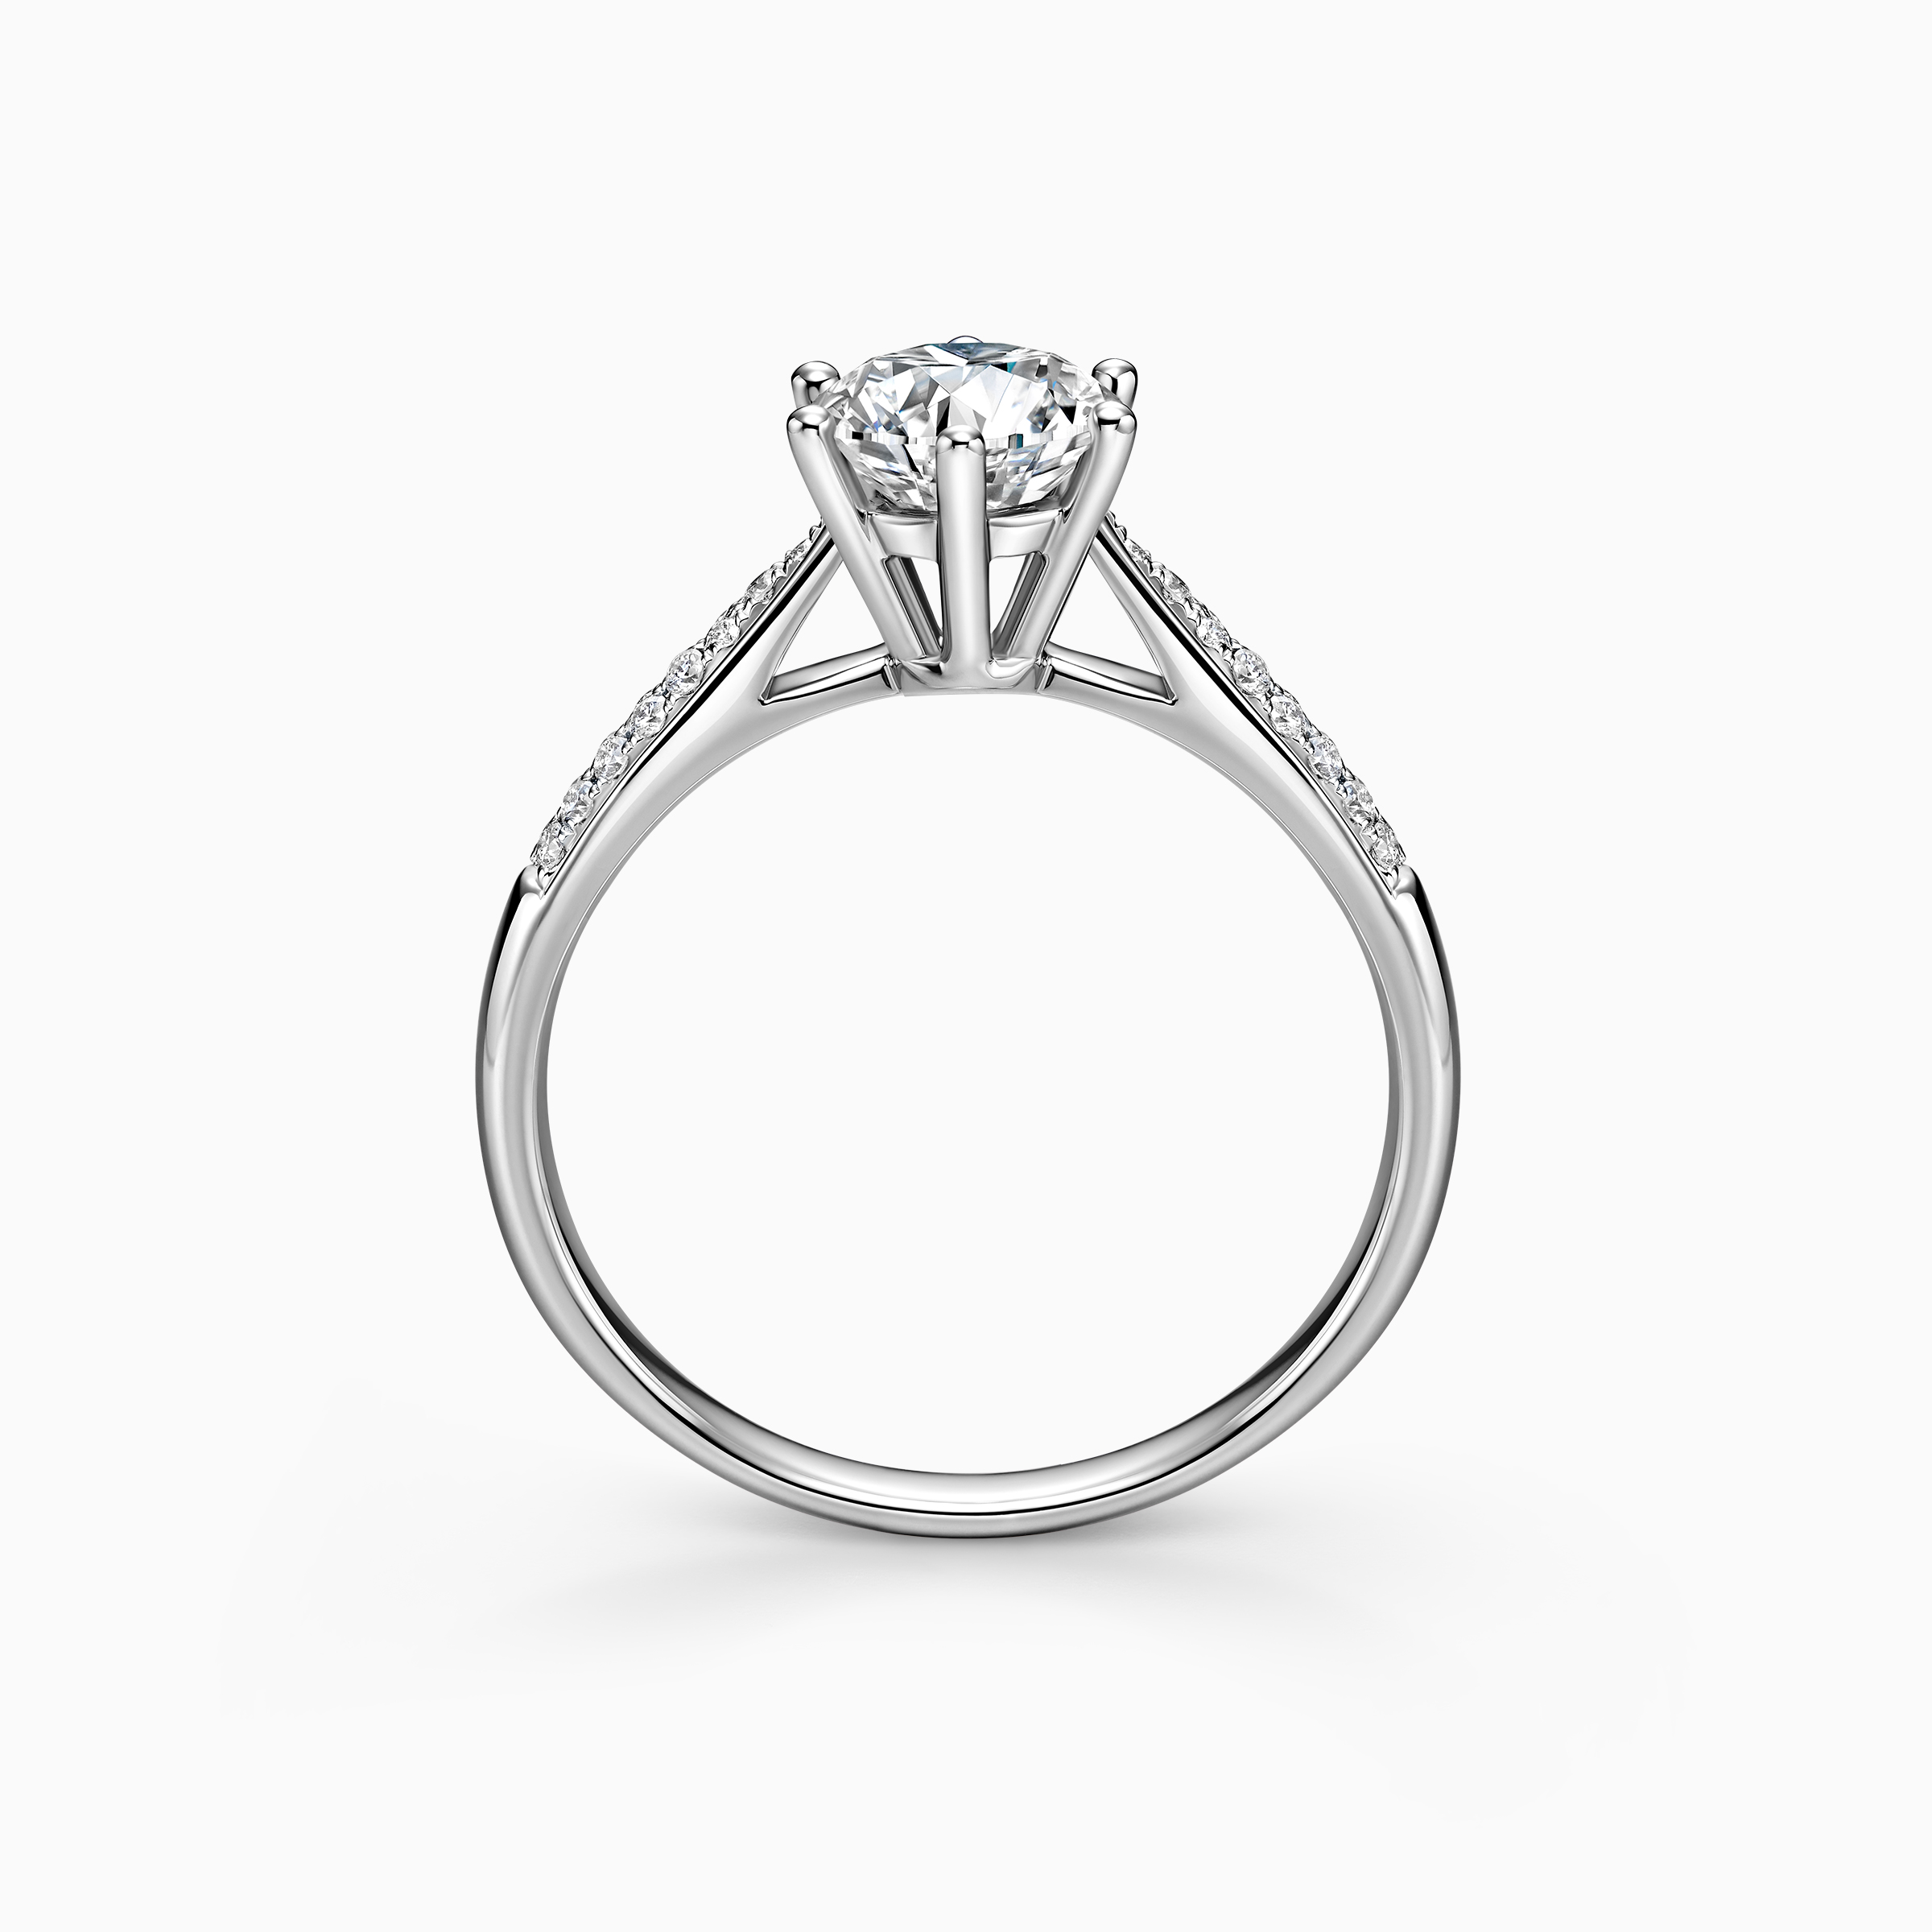 Darry Ring diamond band engagement ring front view